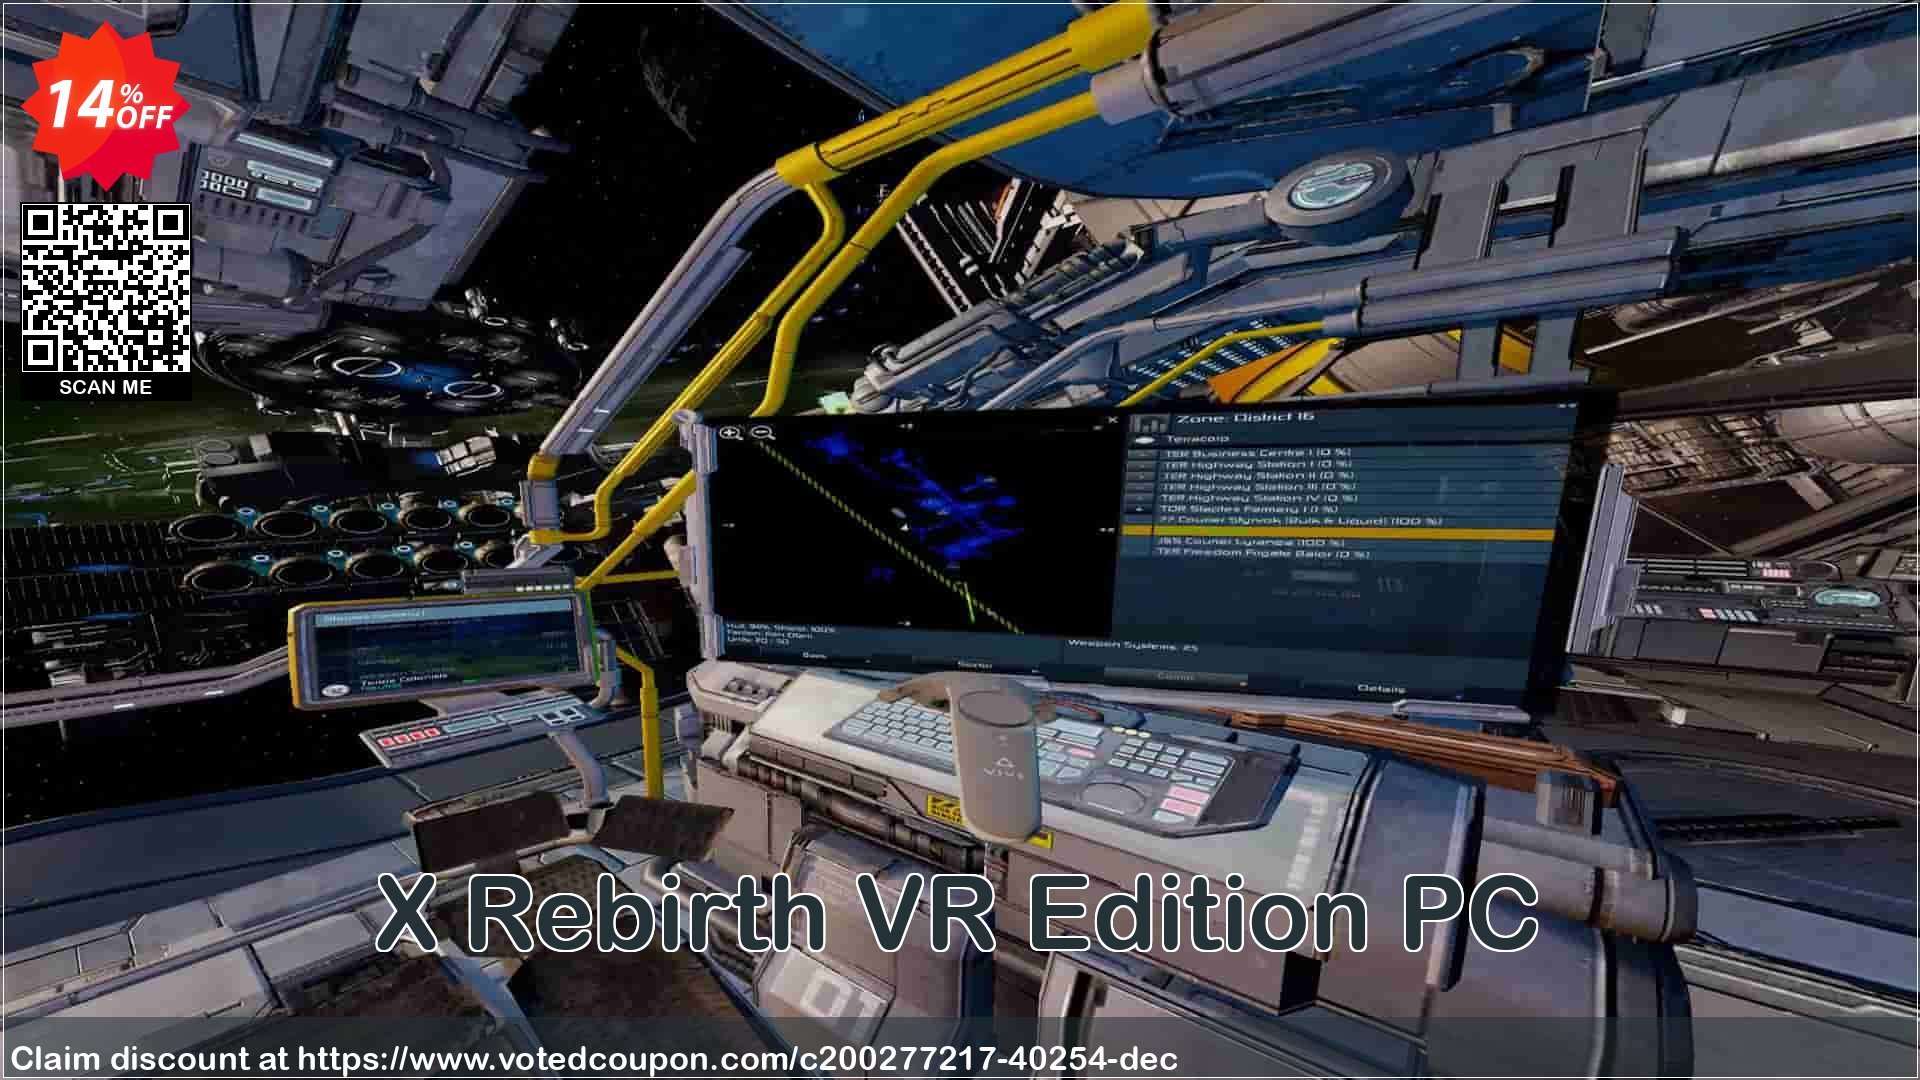 X Rebirth VR Edition PC Coupon Code May 2024, 14% OFF - VotedCoupon